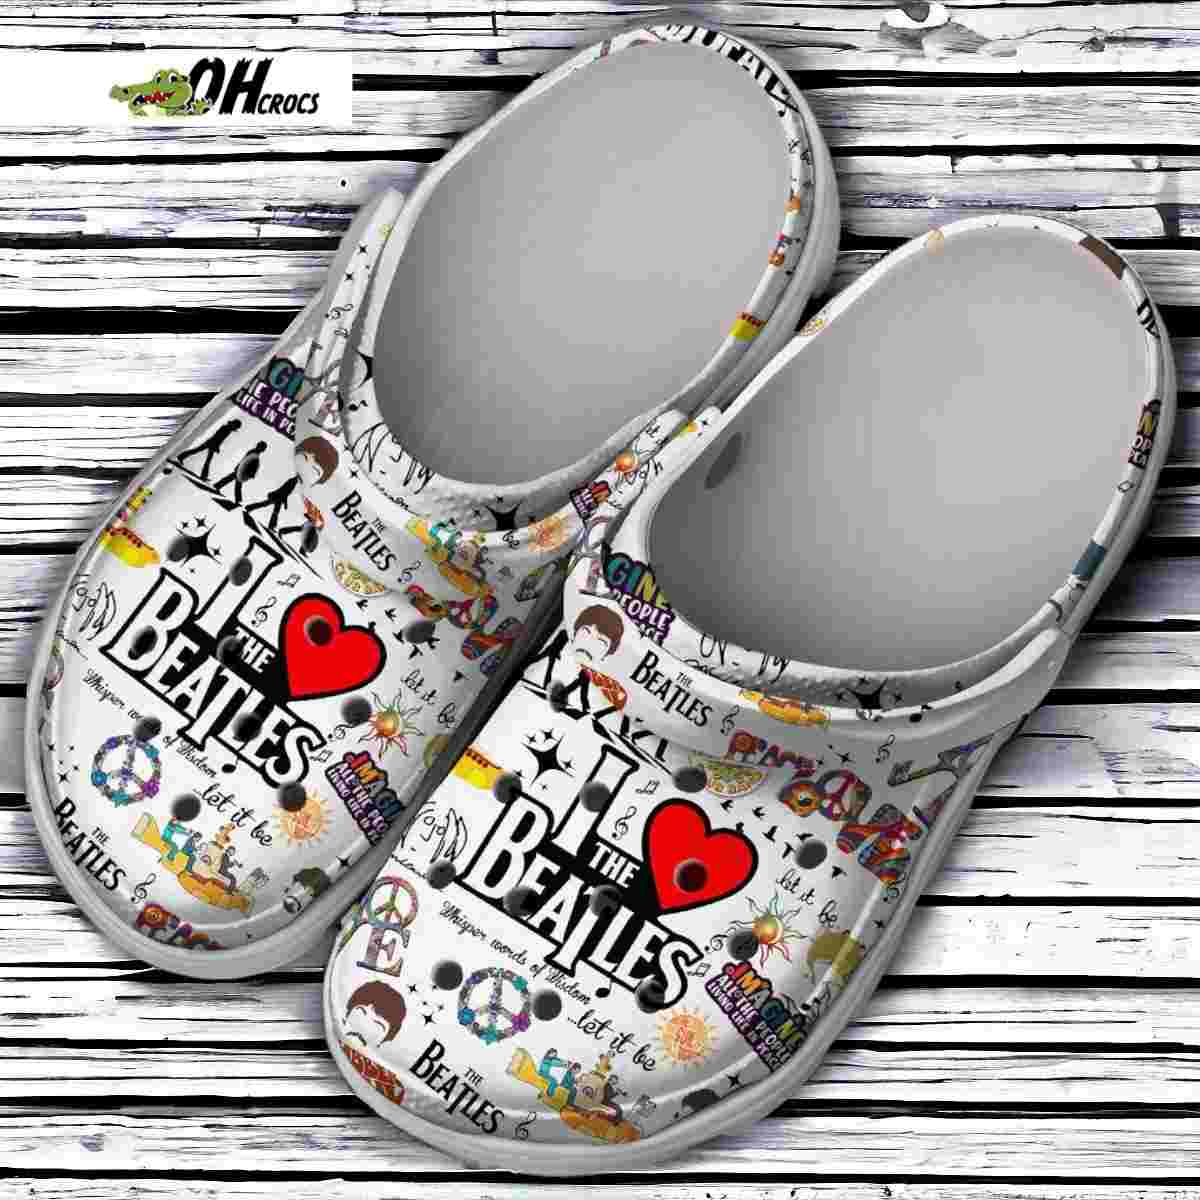 The Beatles Revival Music Comfortable Crocs Clogs Shoes Series Collection Elite Gift